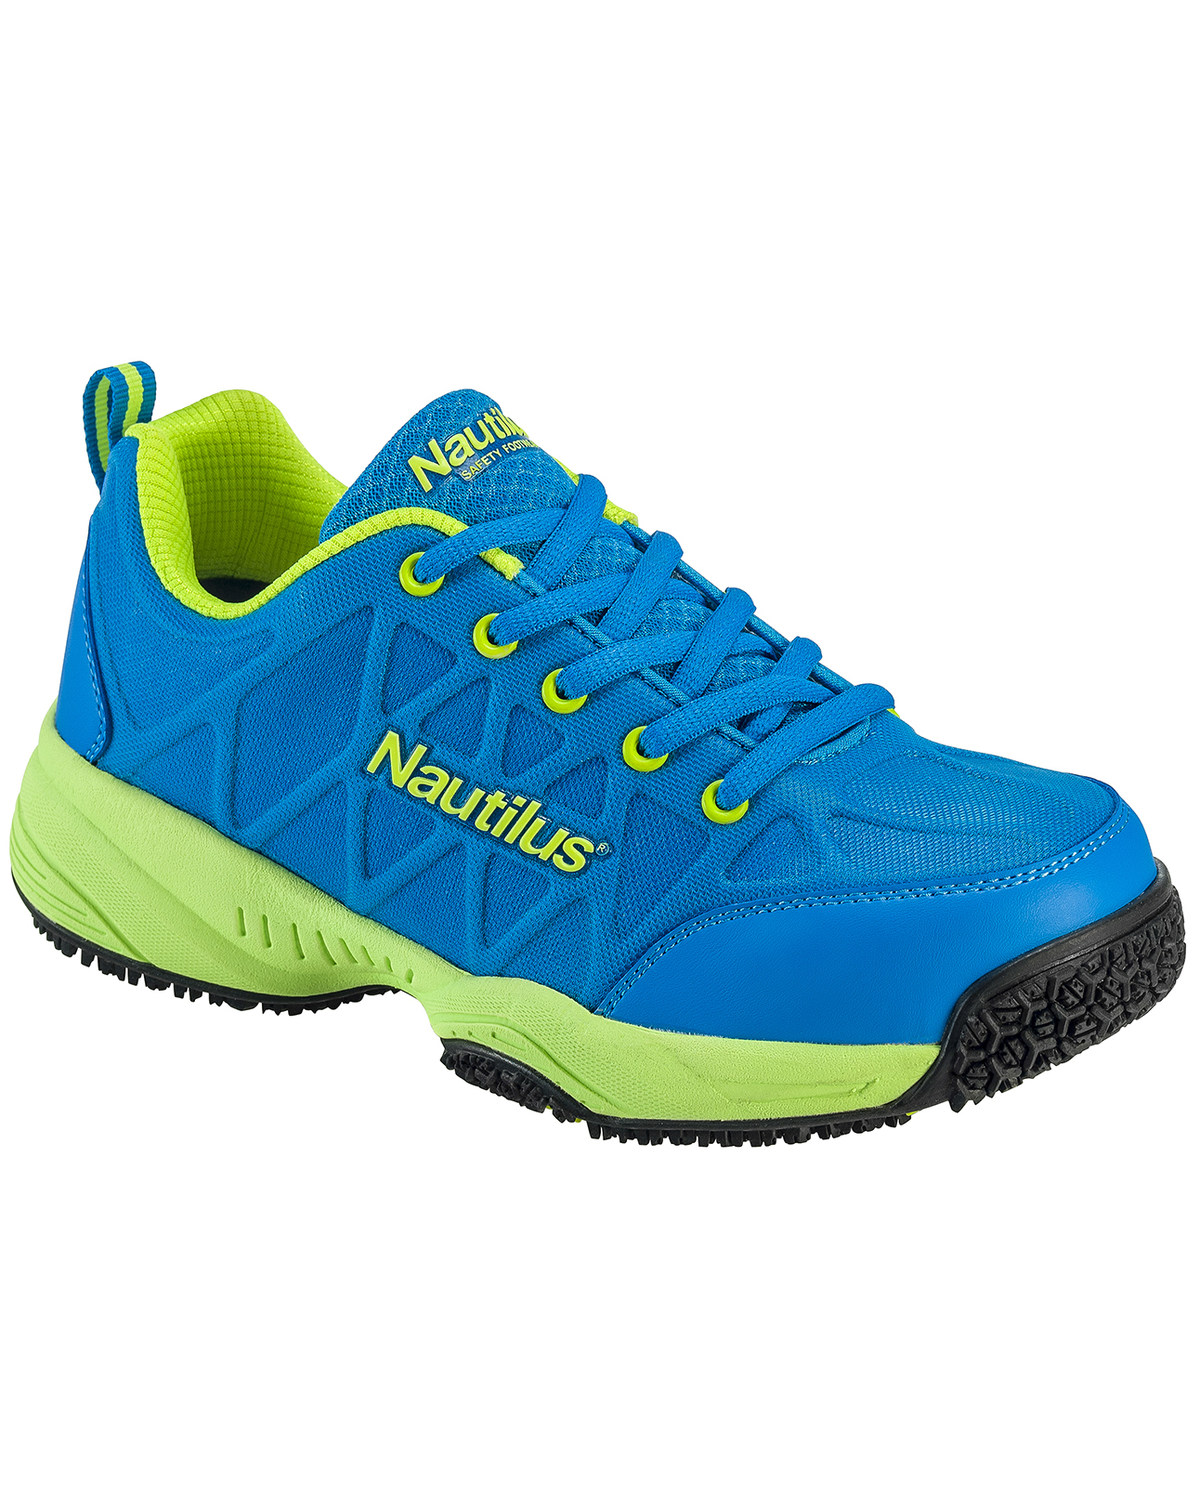 womens green athletic shoes